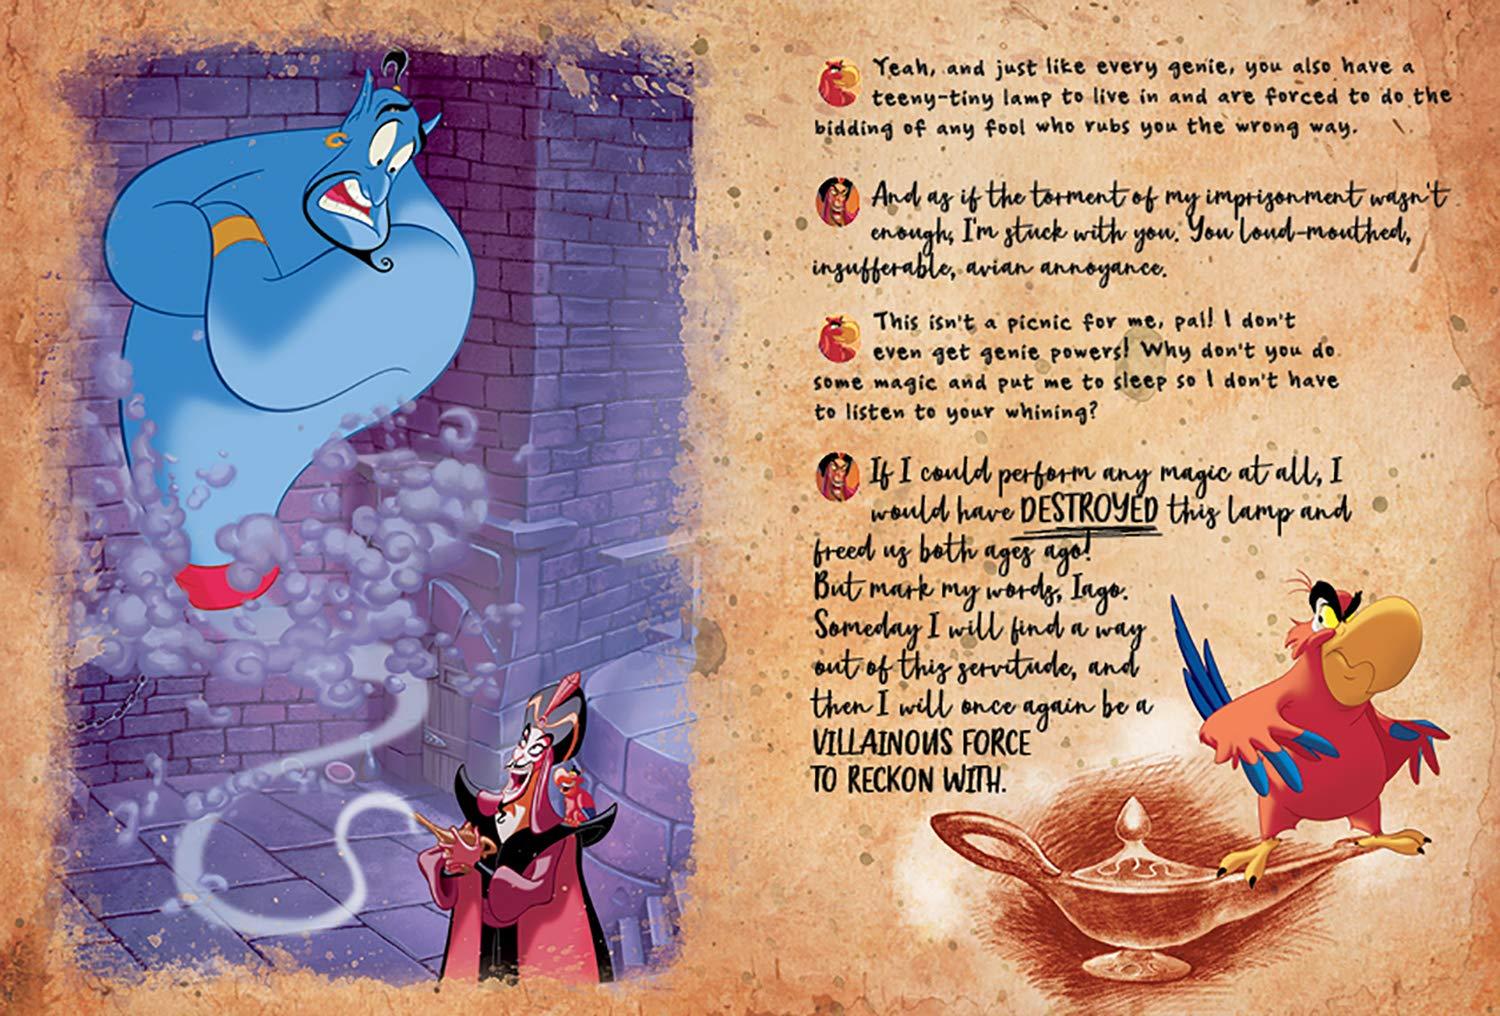 Disney Villains The Evilest Of Them All (Fact Book)